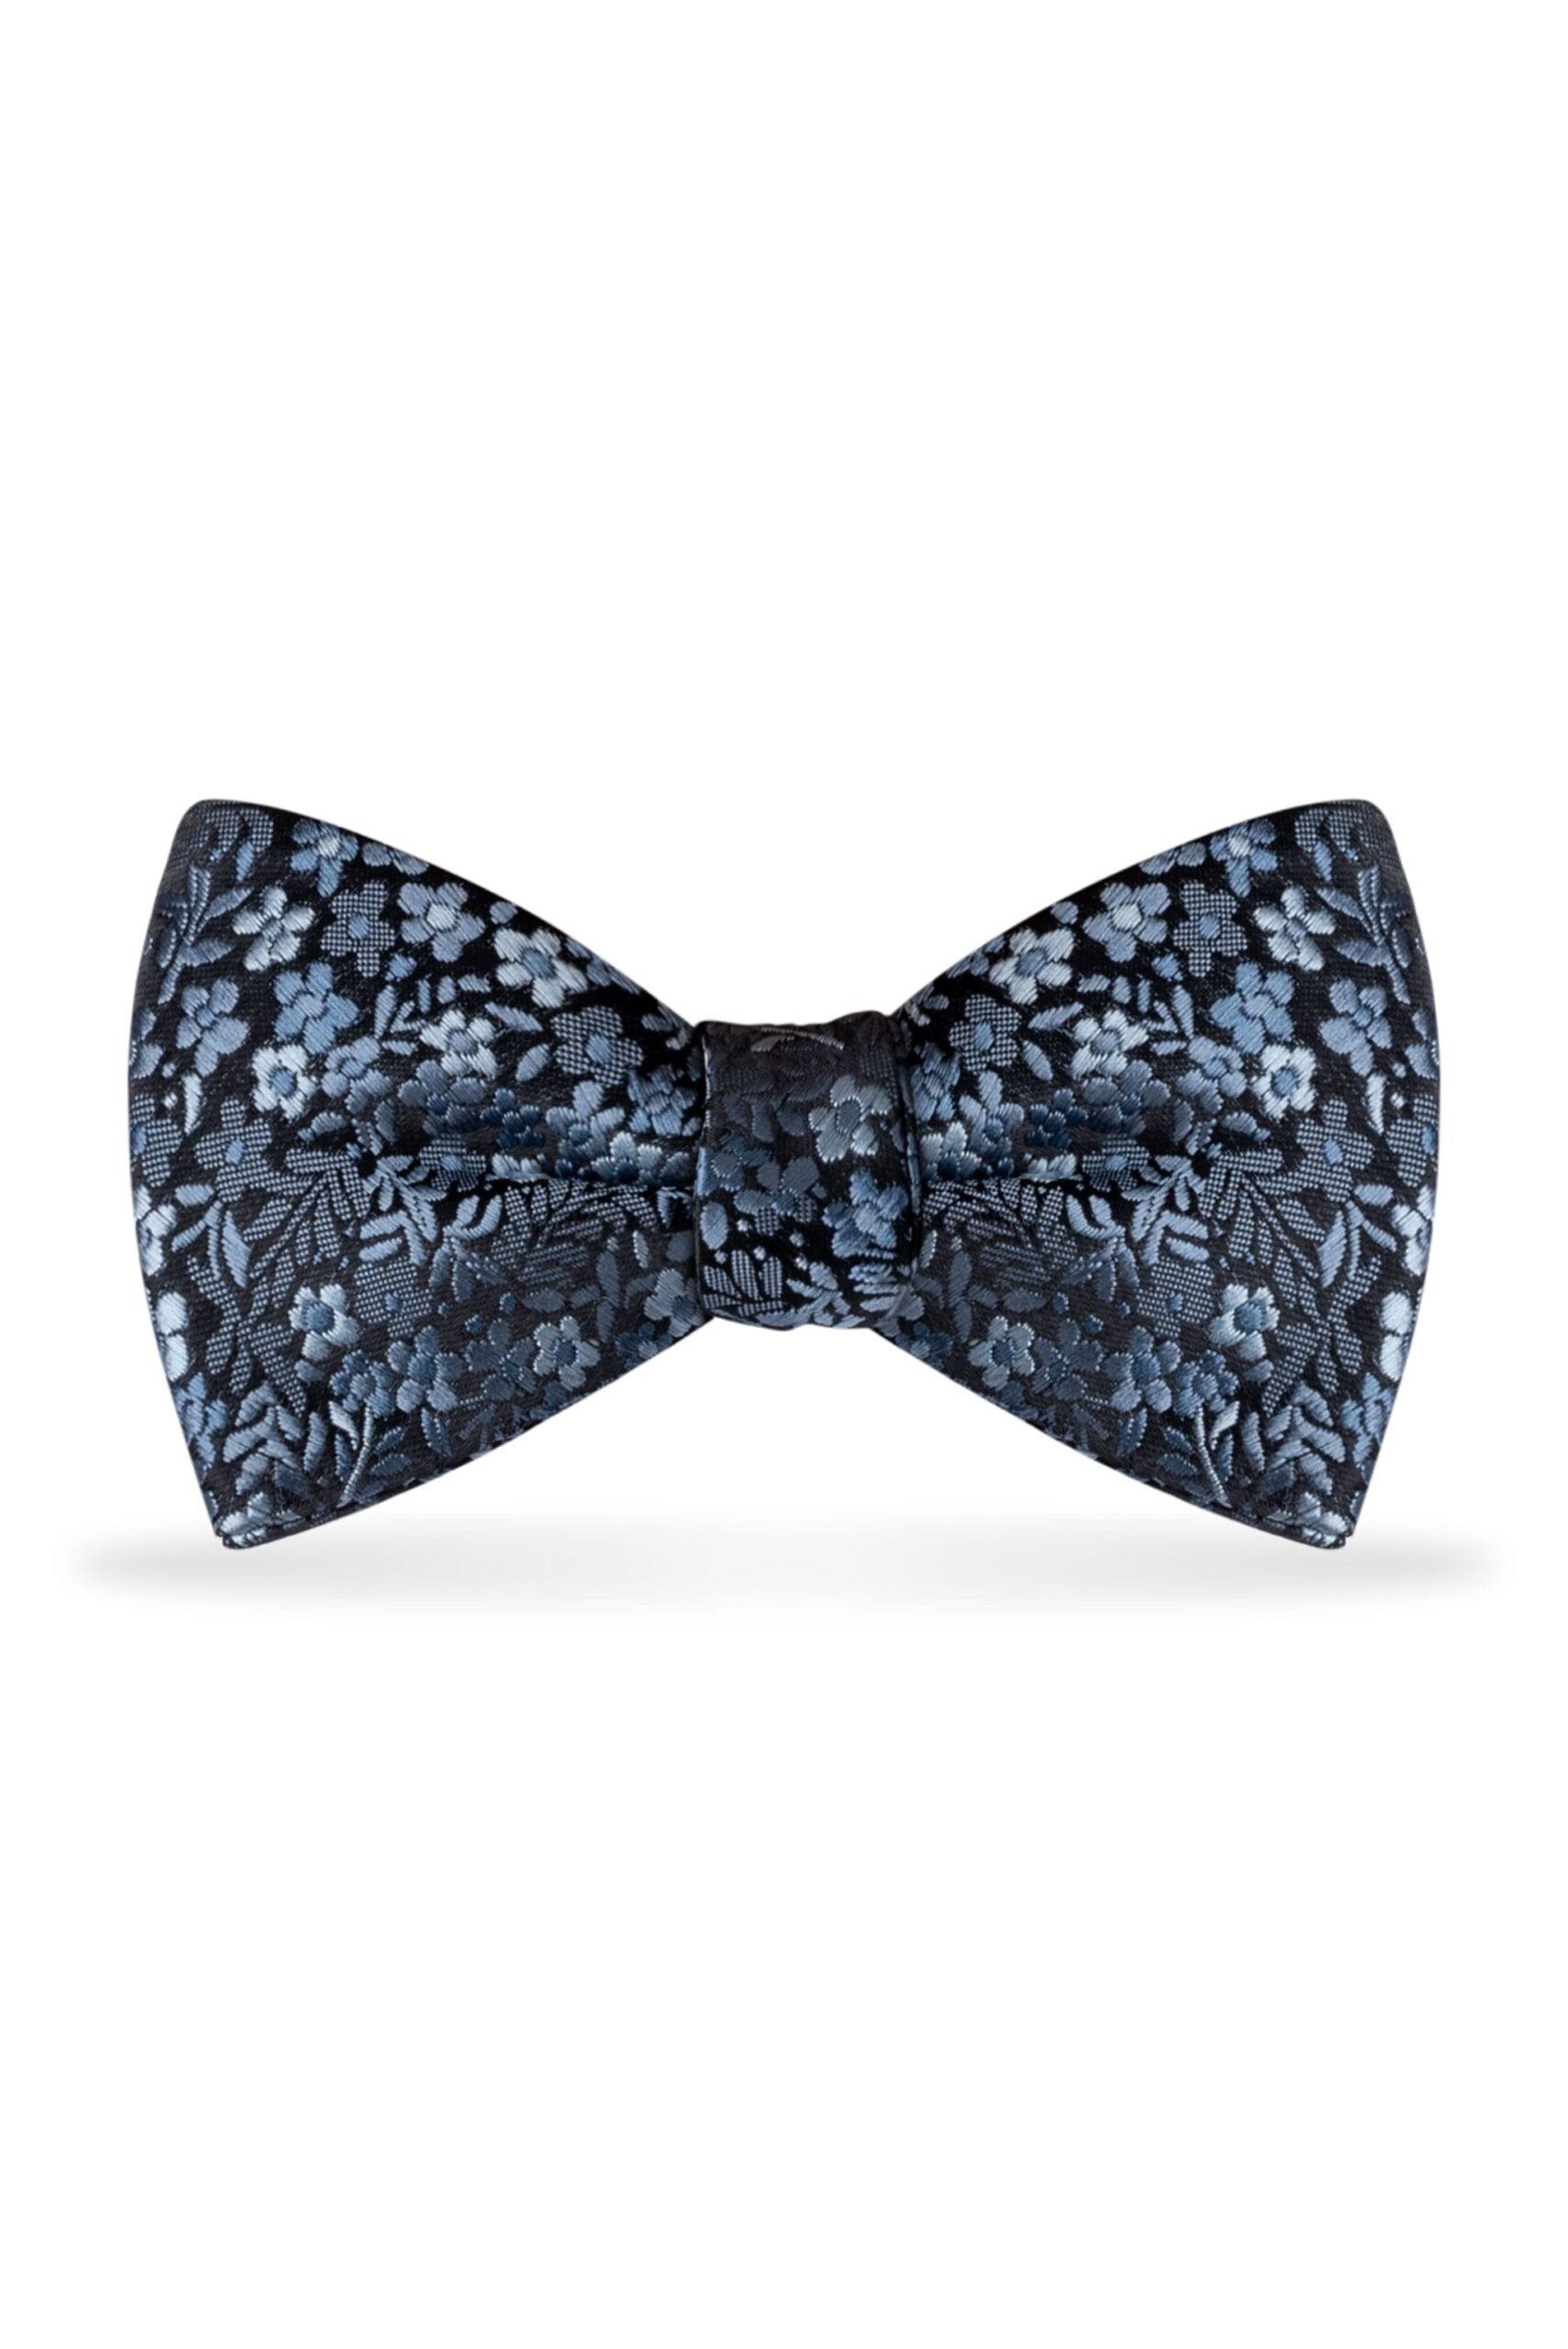 Floral Slate Blue Bow Tie 1